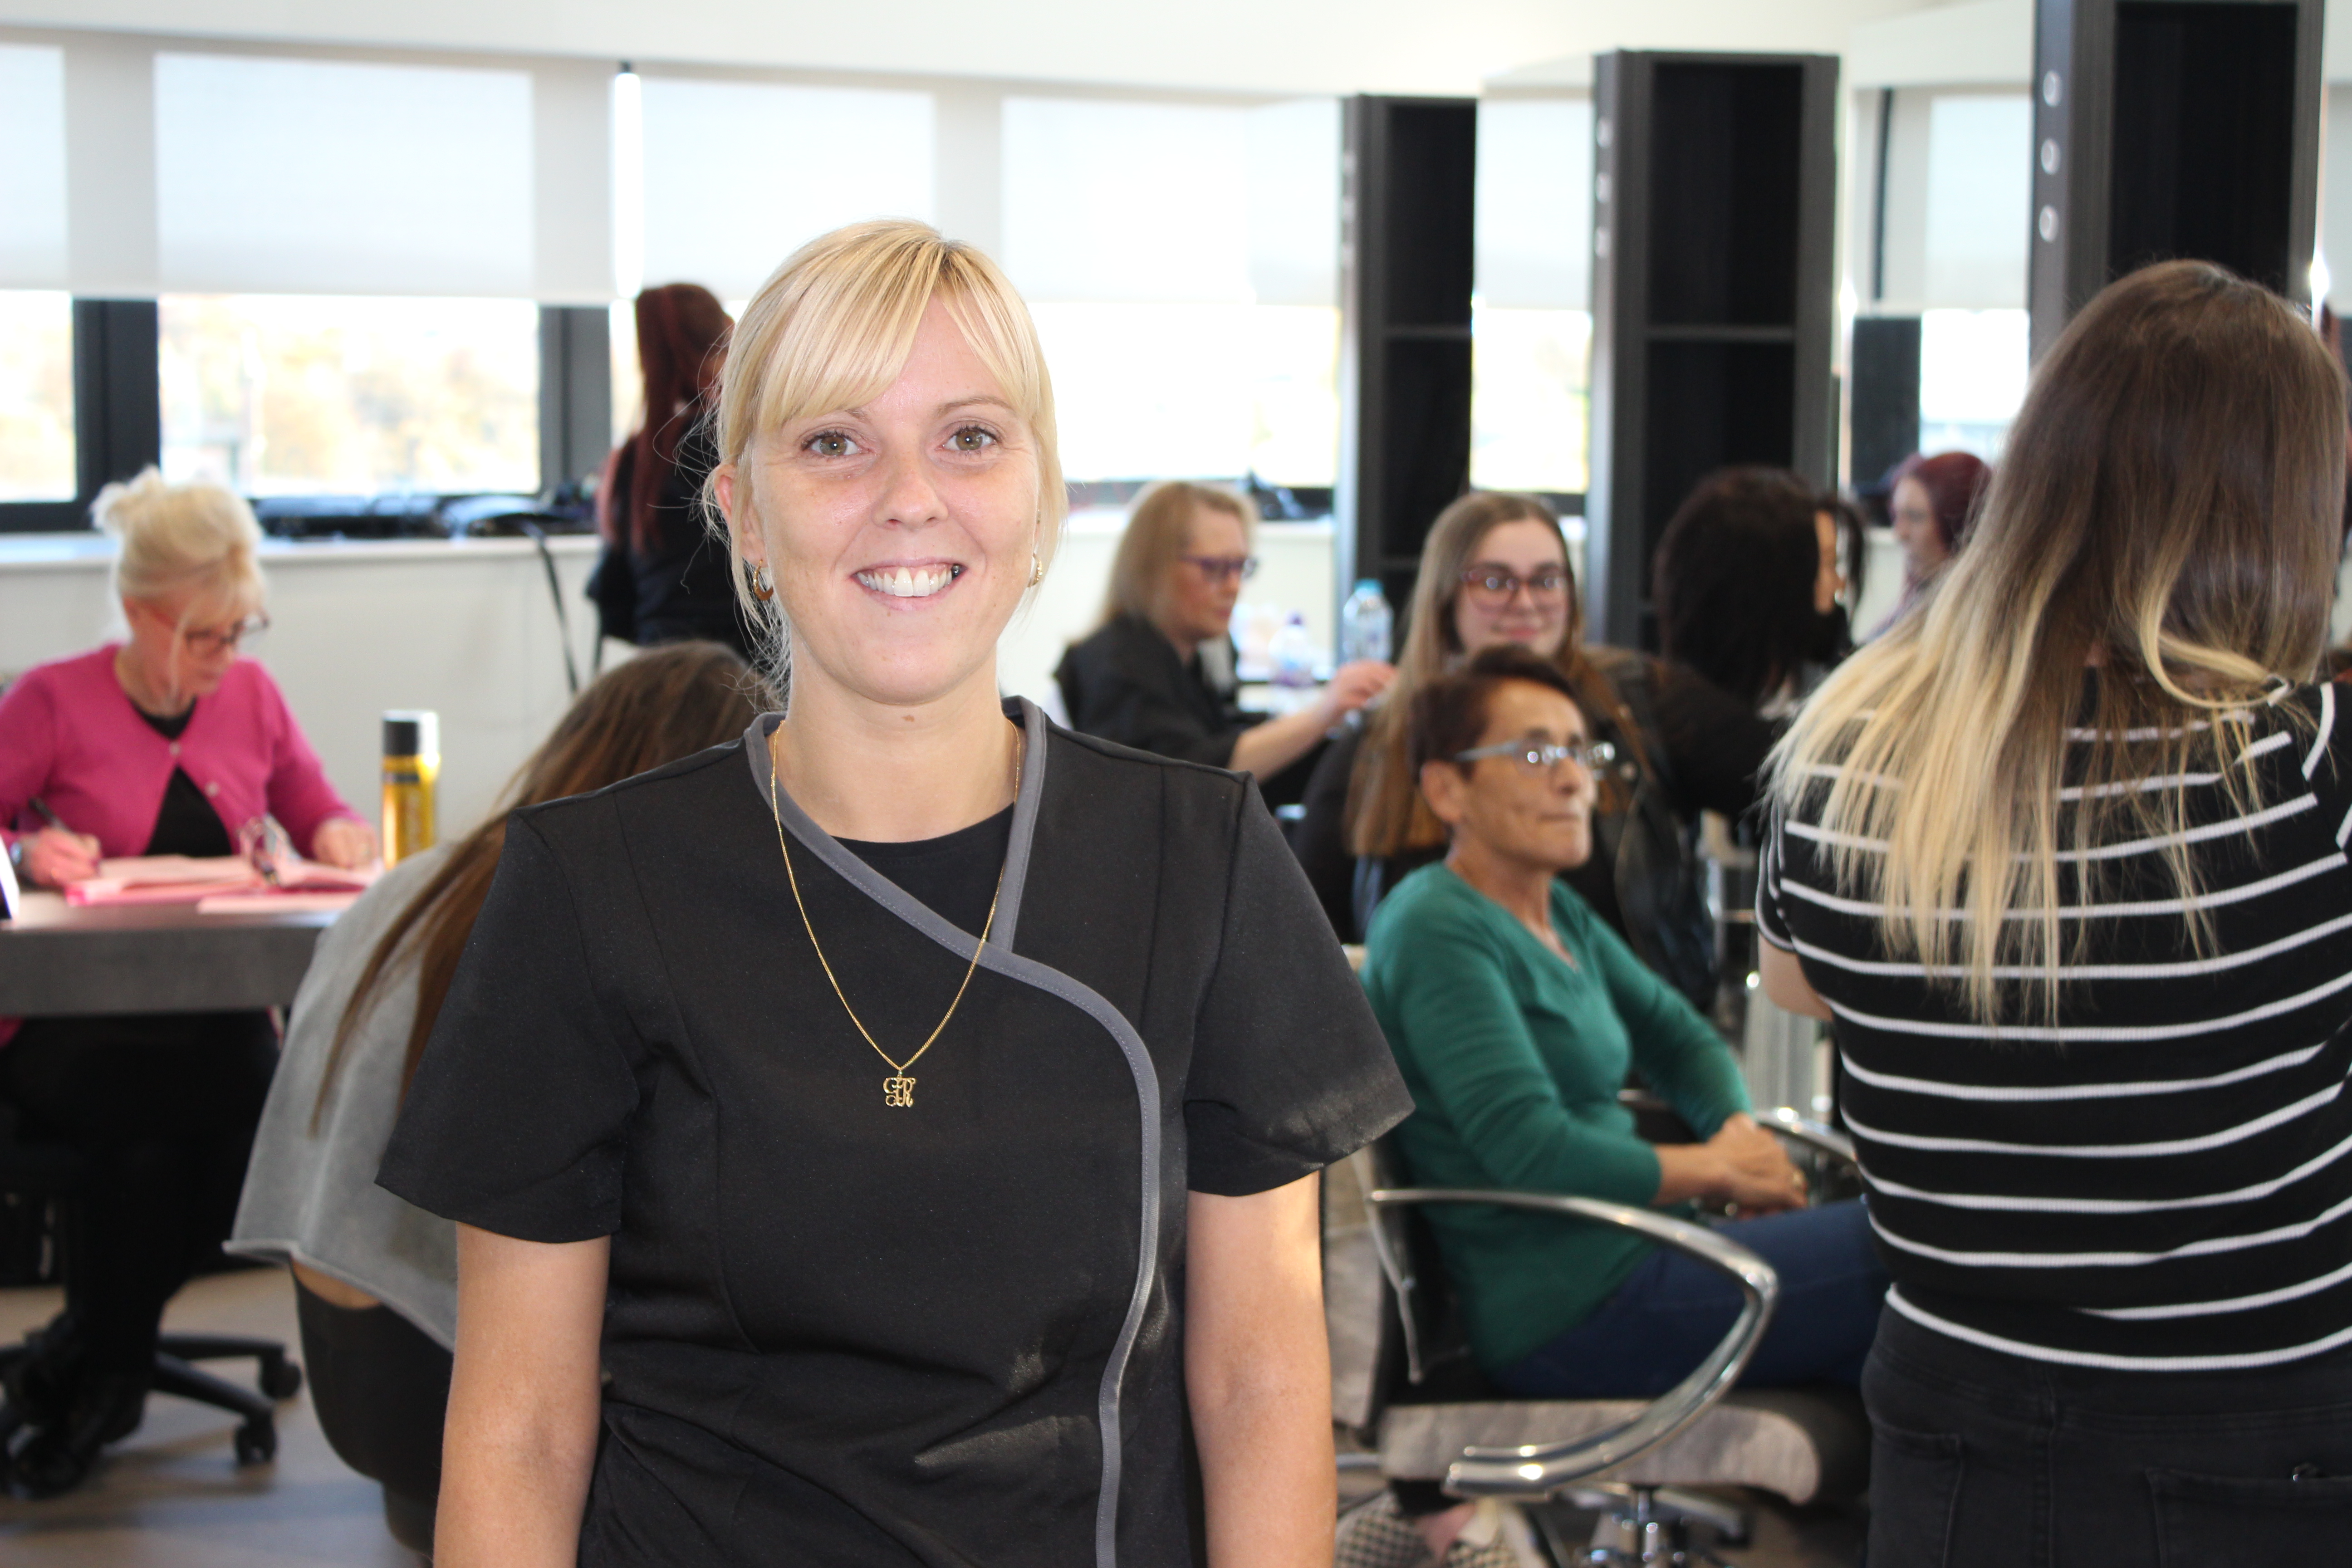 Hairdressing student Gemma in class with classmates and lecturer behind her